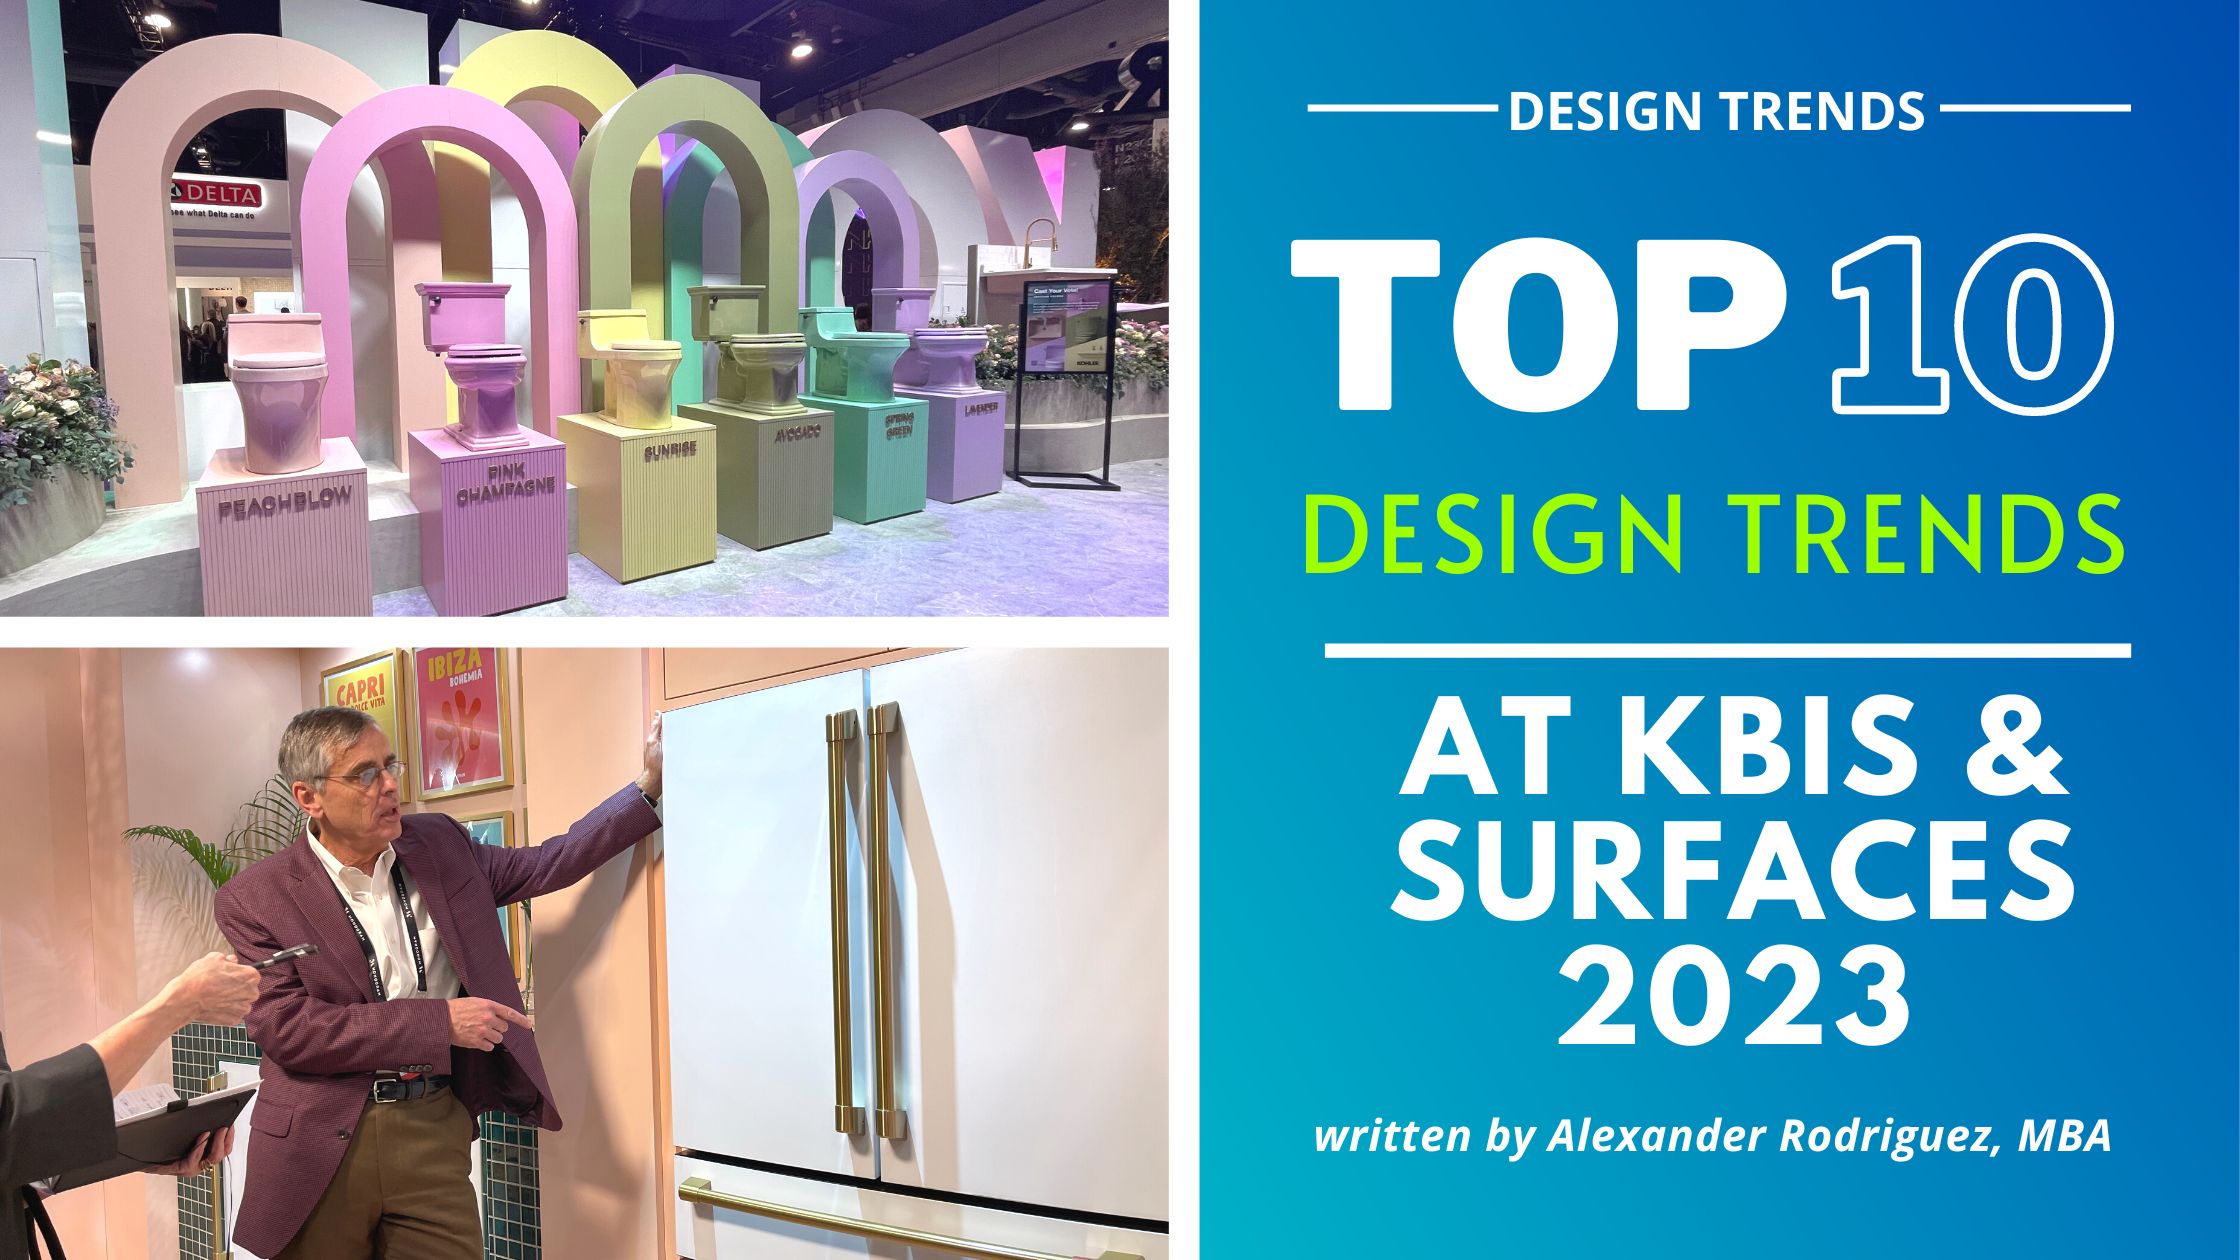 Top 10 Design Trends Seen at KBIS 2023